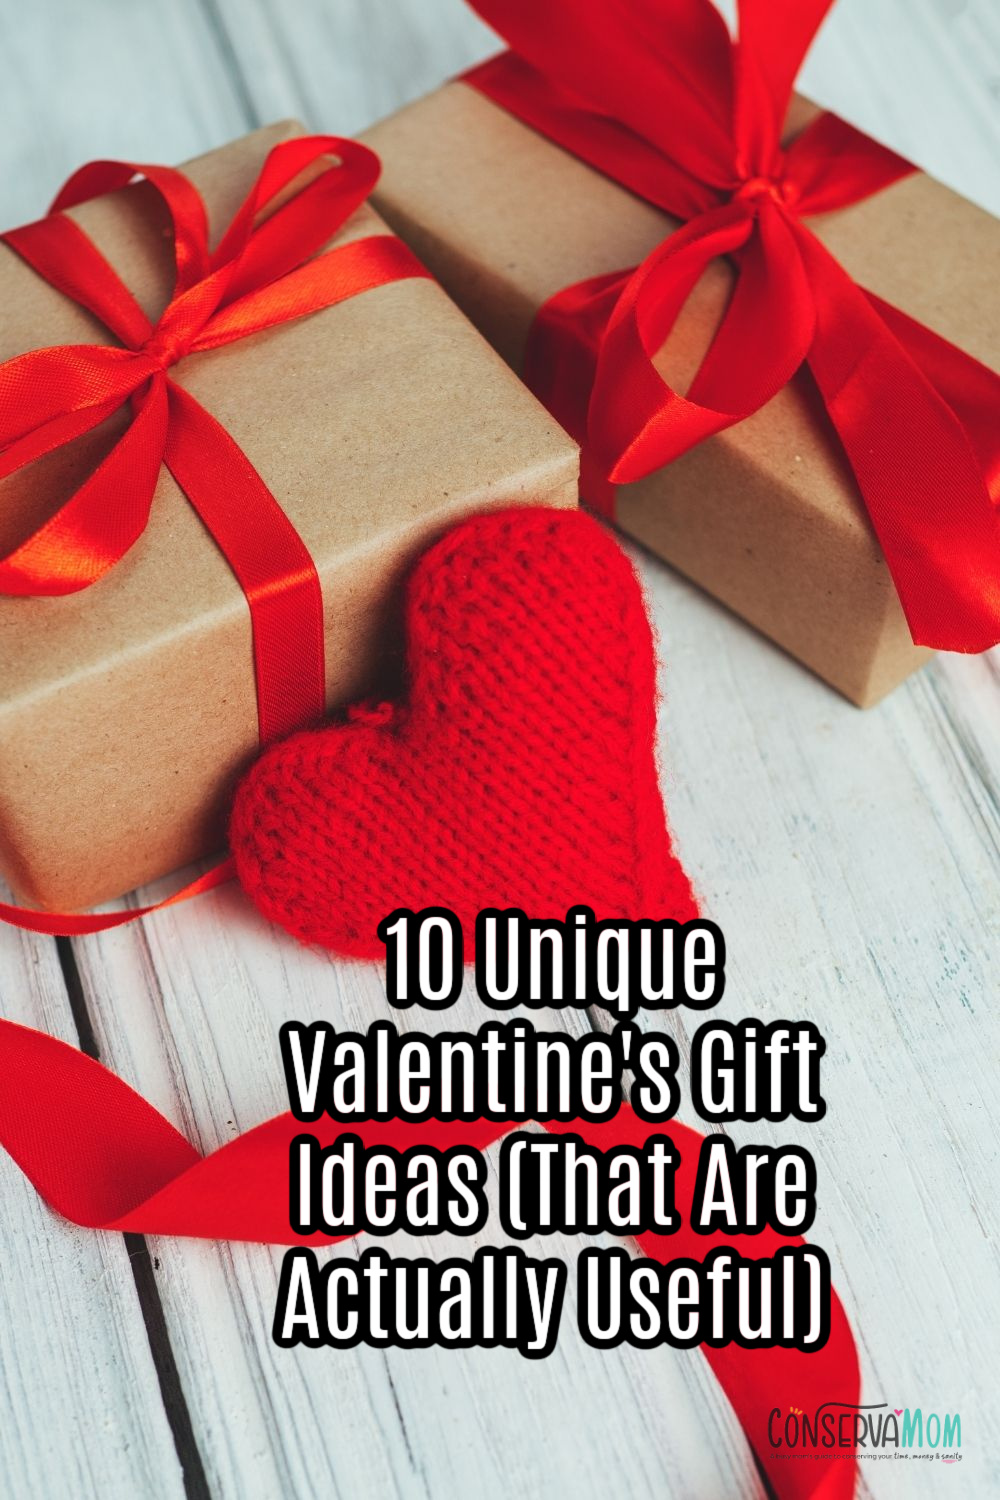 10 Unique Valentine's Gift Ideas (That Are Actually Useful)